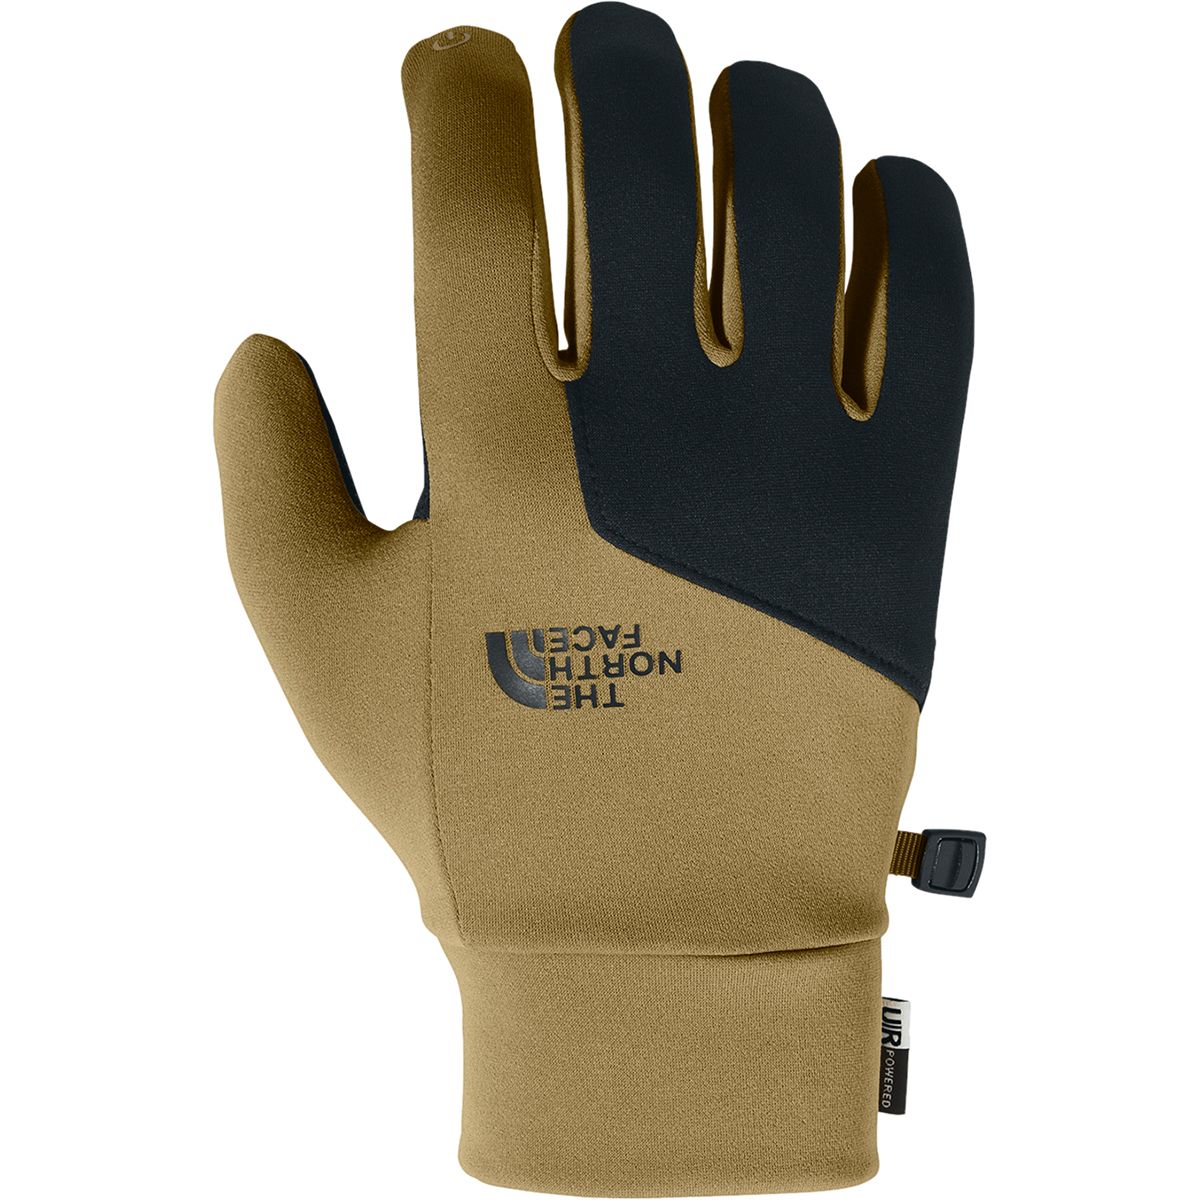 north face glove liners